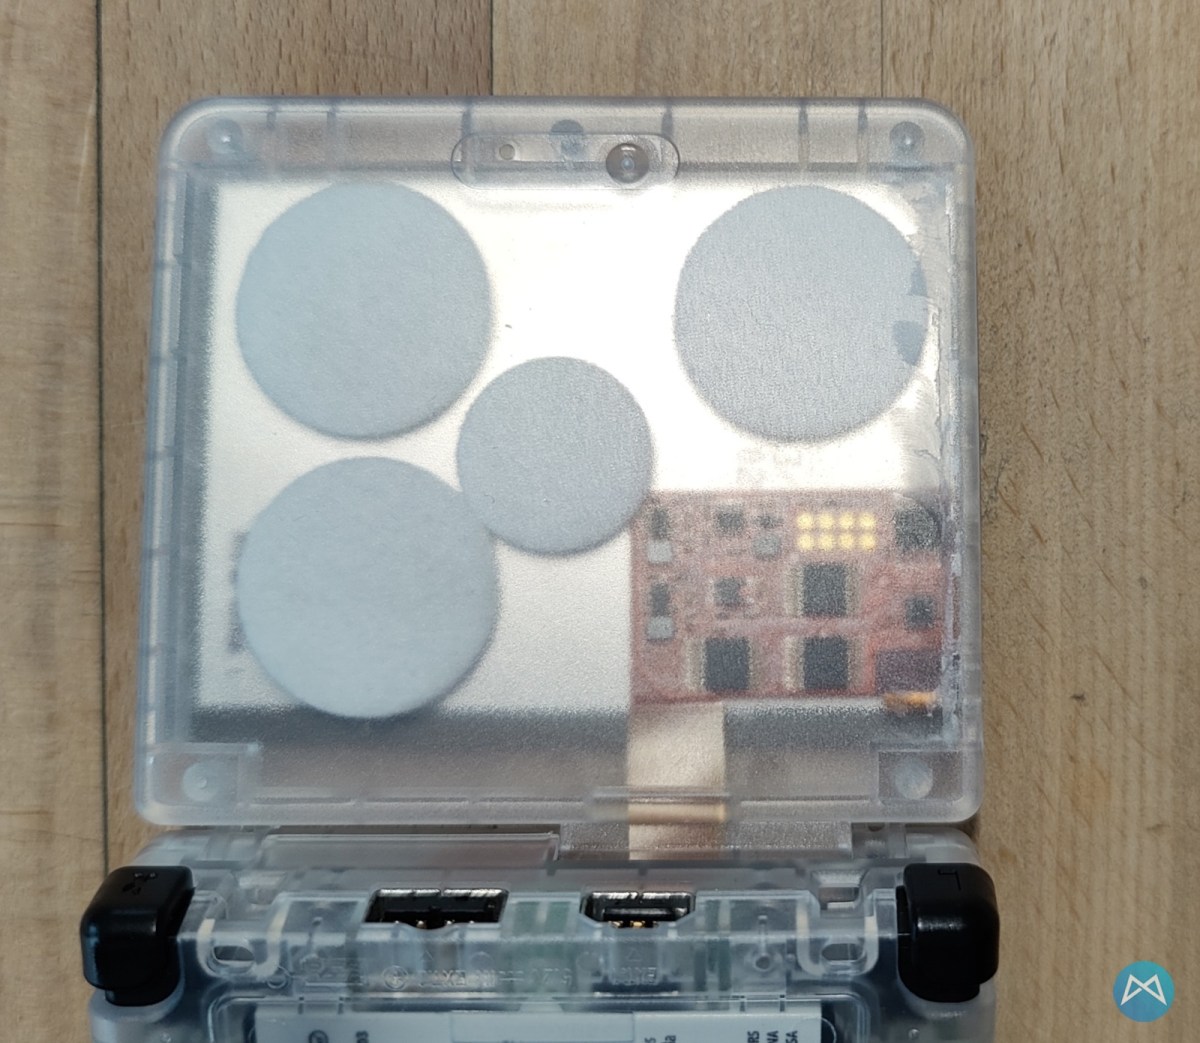 Nintendo Combo Advance SP Display and Case Modification (3)